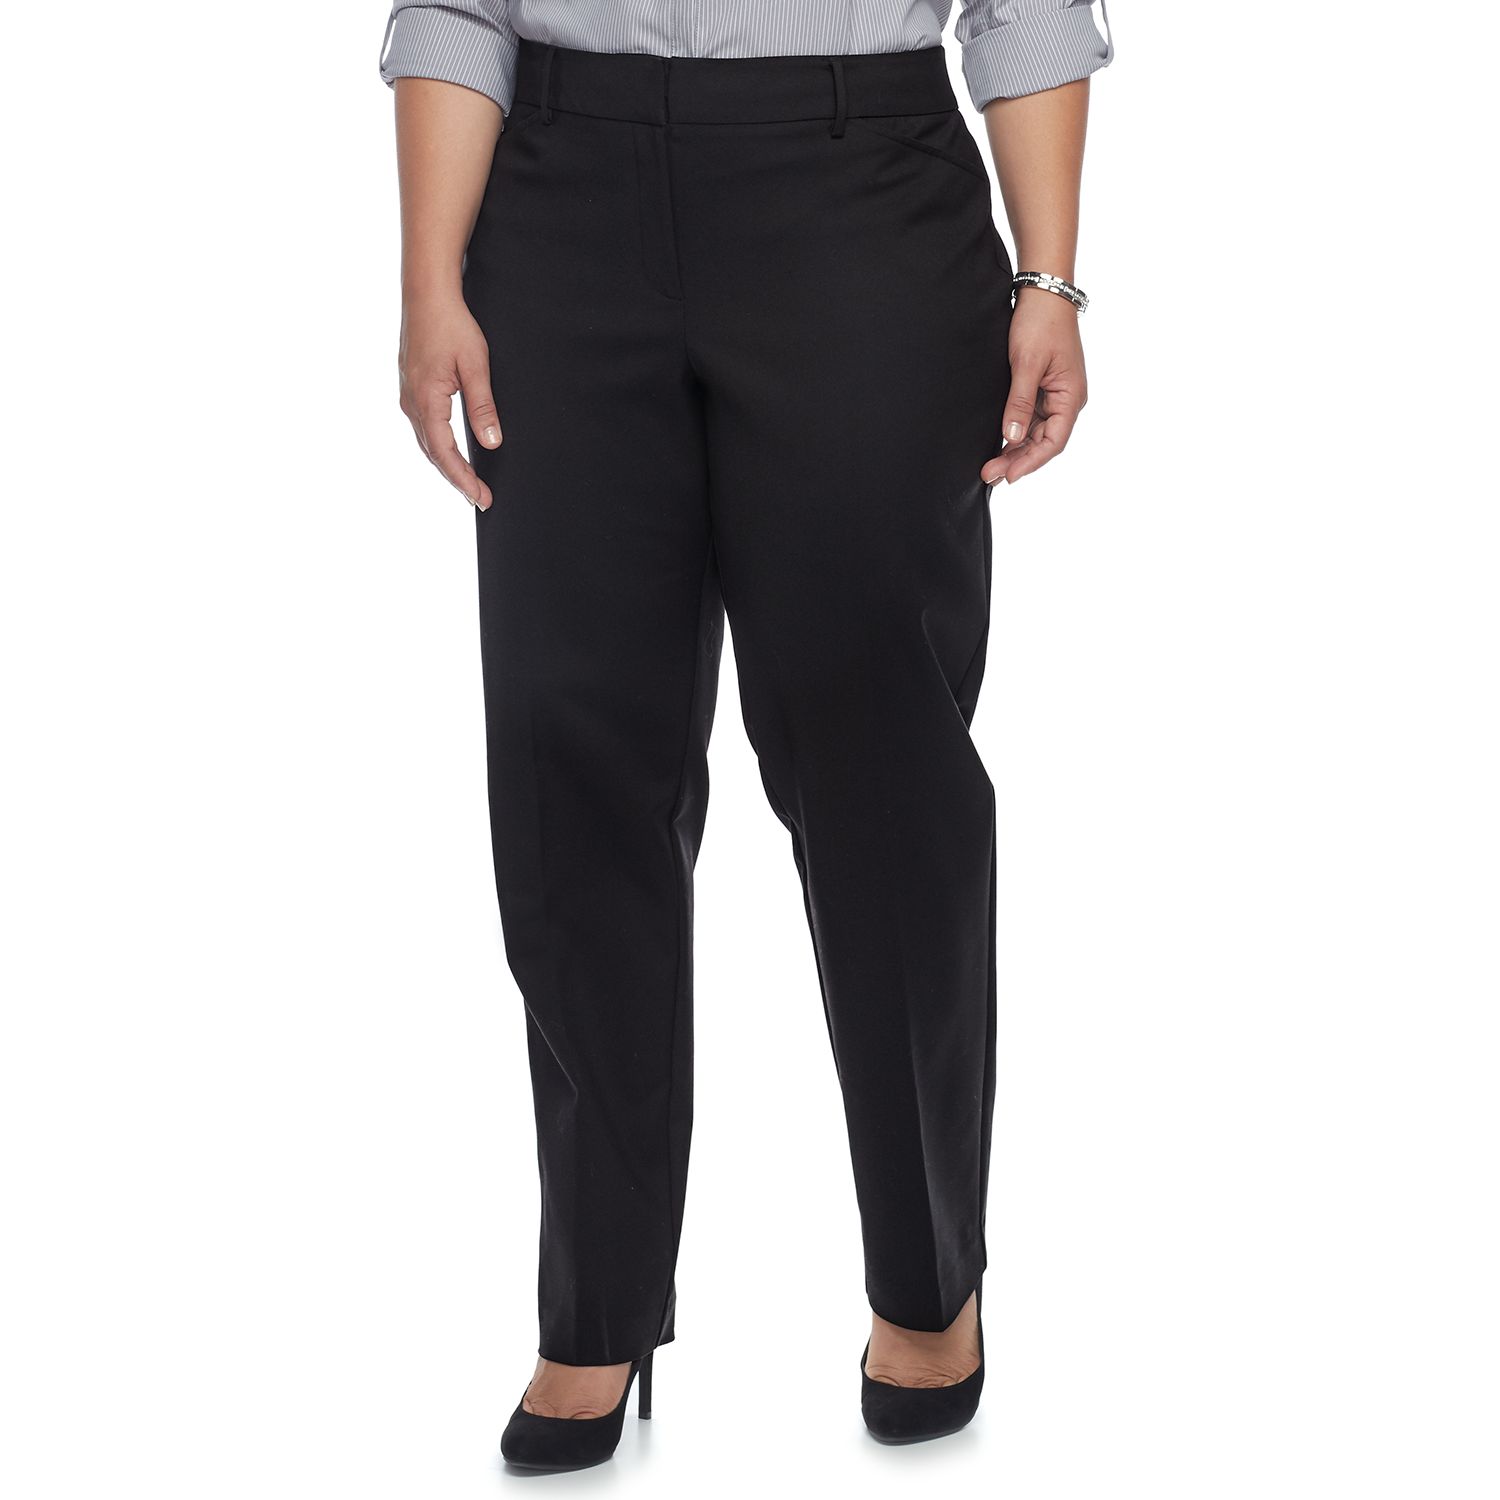 women's plus size pants for work